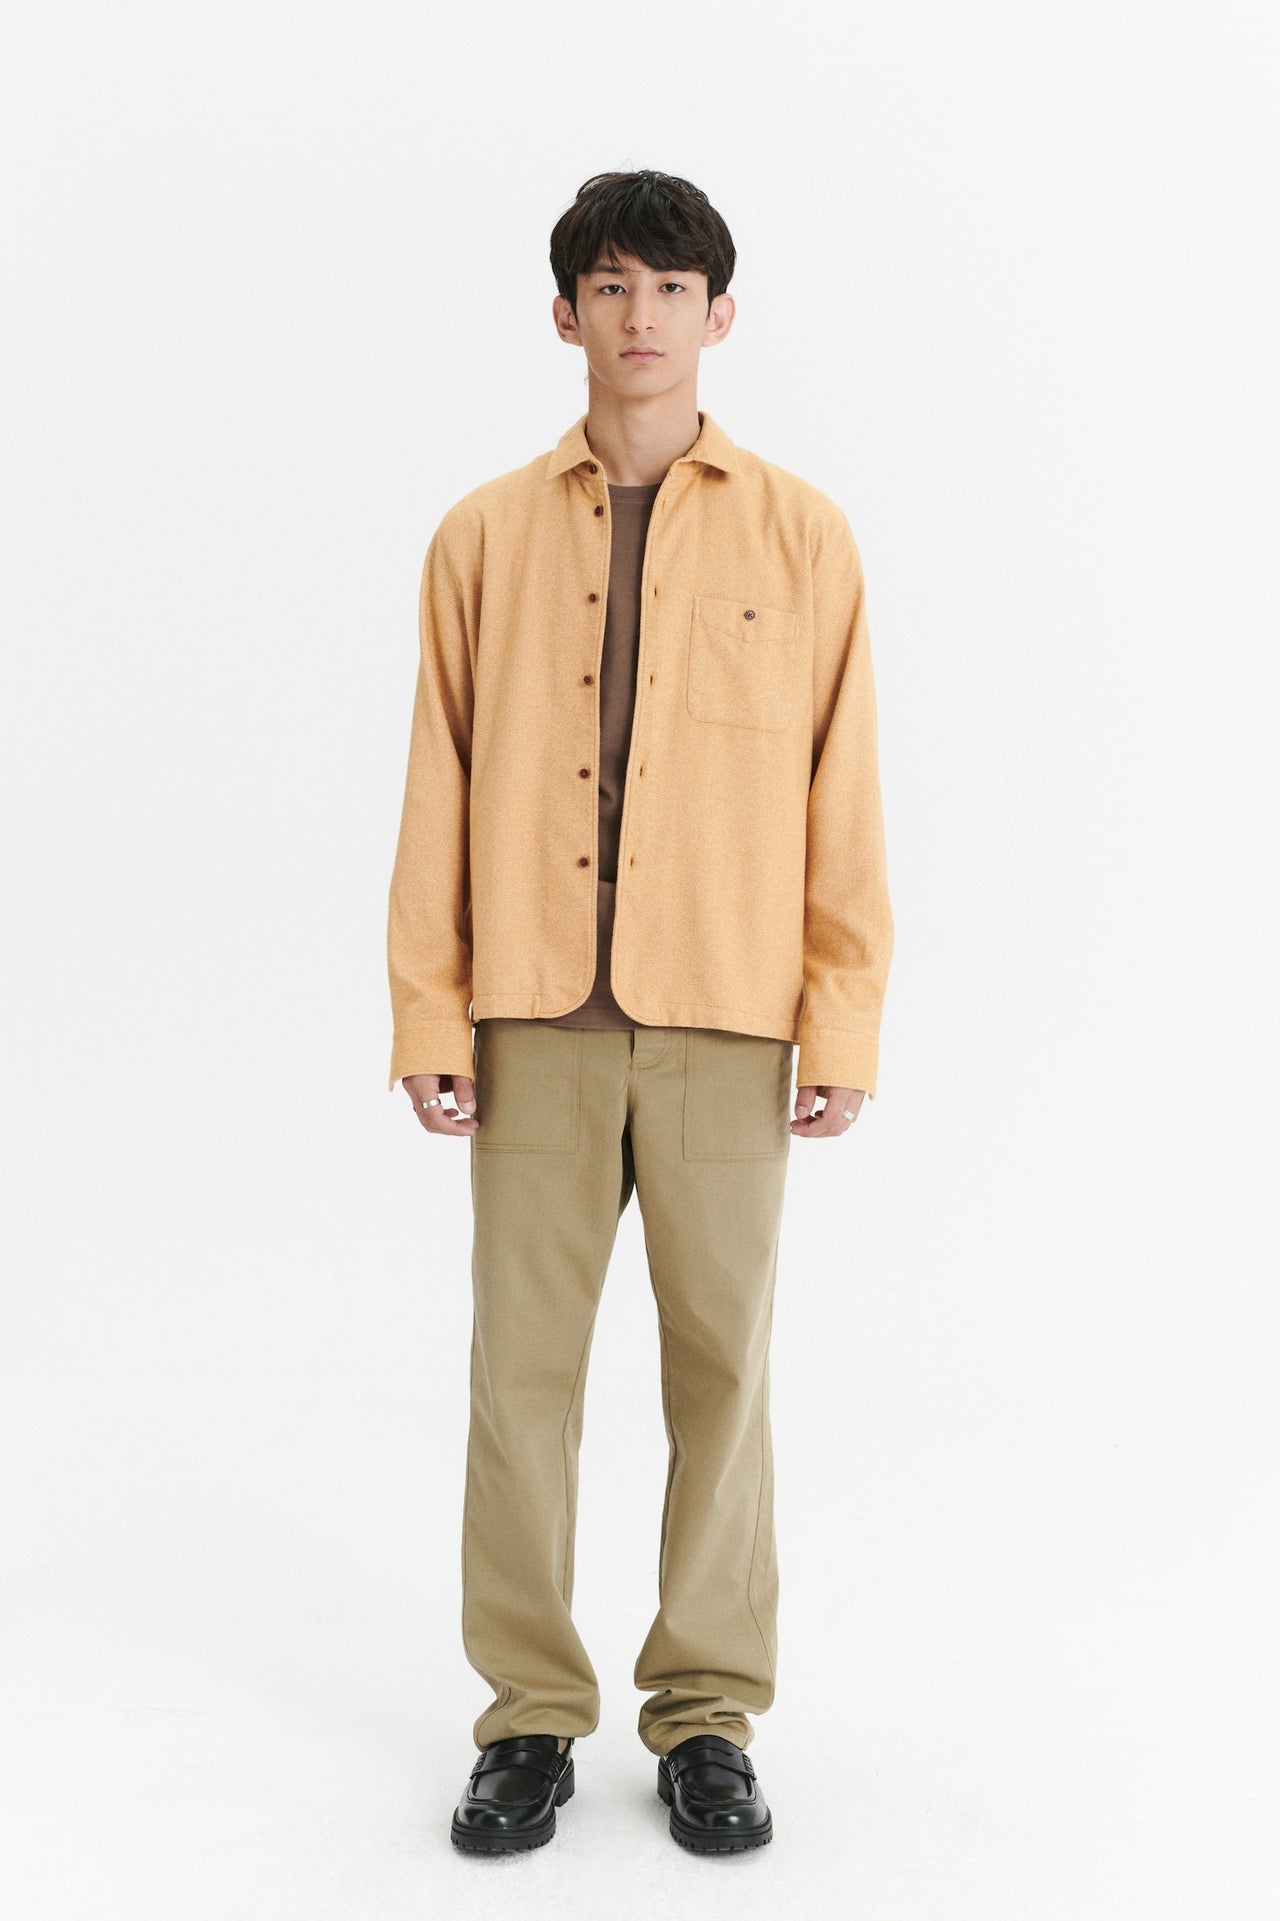 Strong Shirt in the Finest Portuguese Curcuma Yellow Cotton Flannel